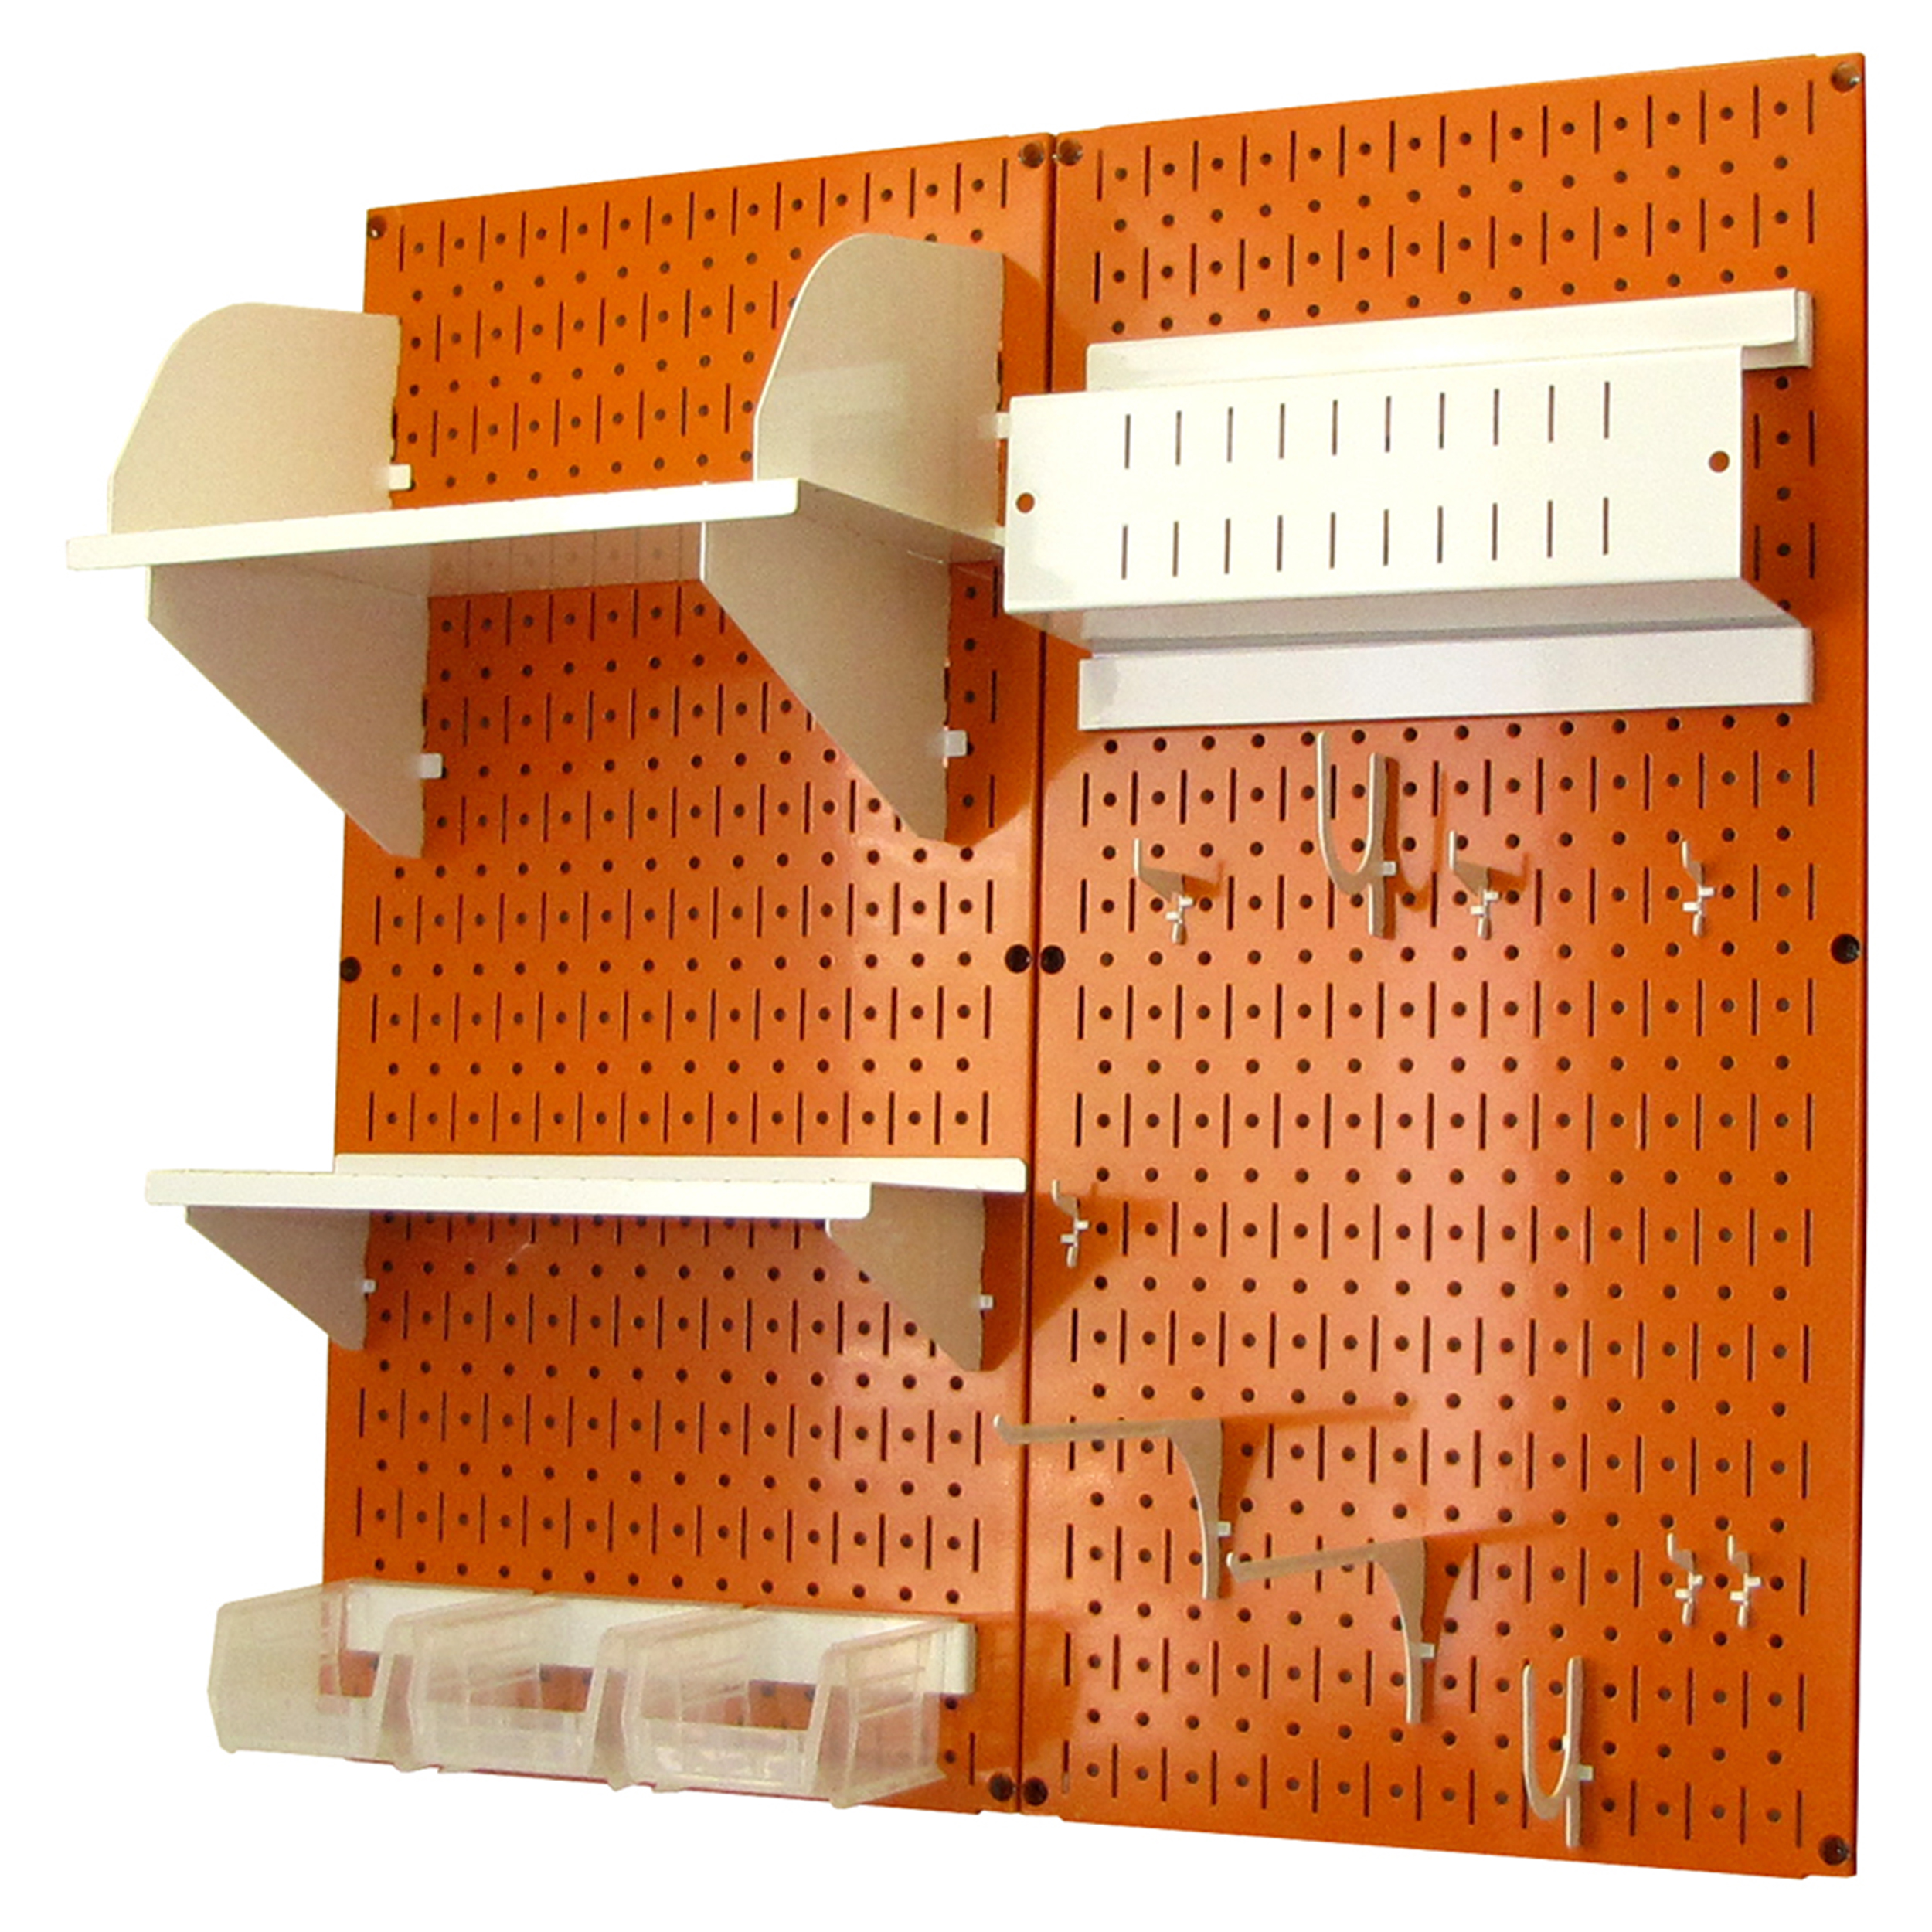 Pegboard Hobby Craft Pegboard Organizer Storage Kit With Orange Pegboard And White Accessories